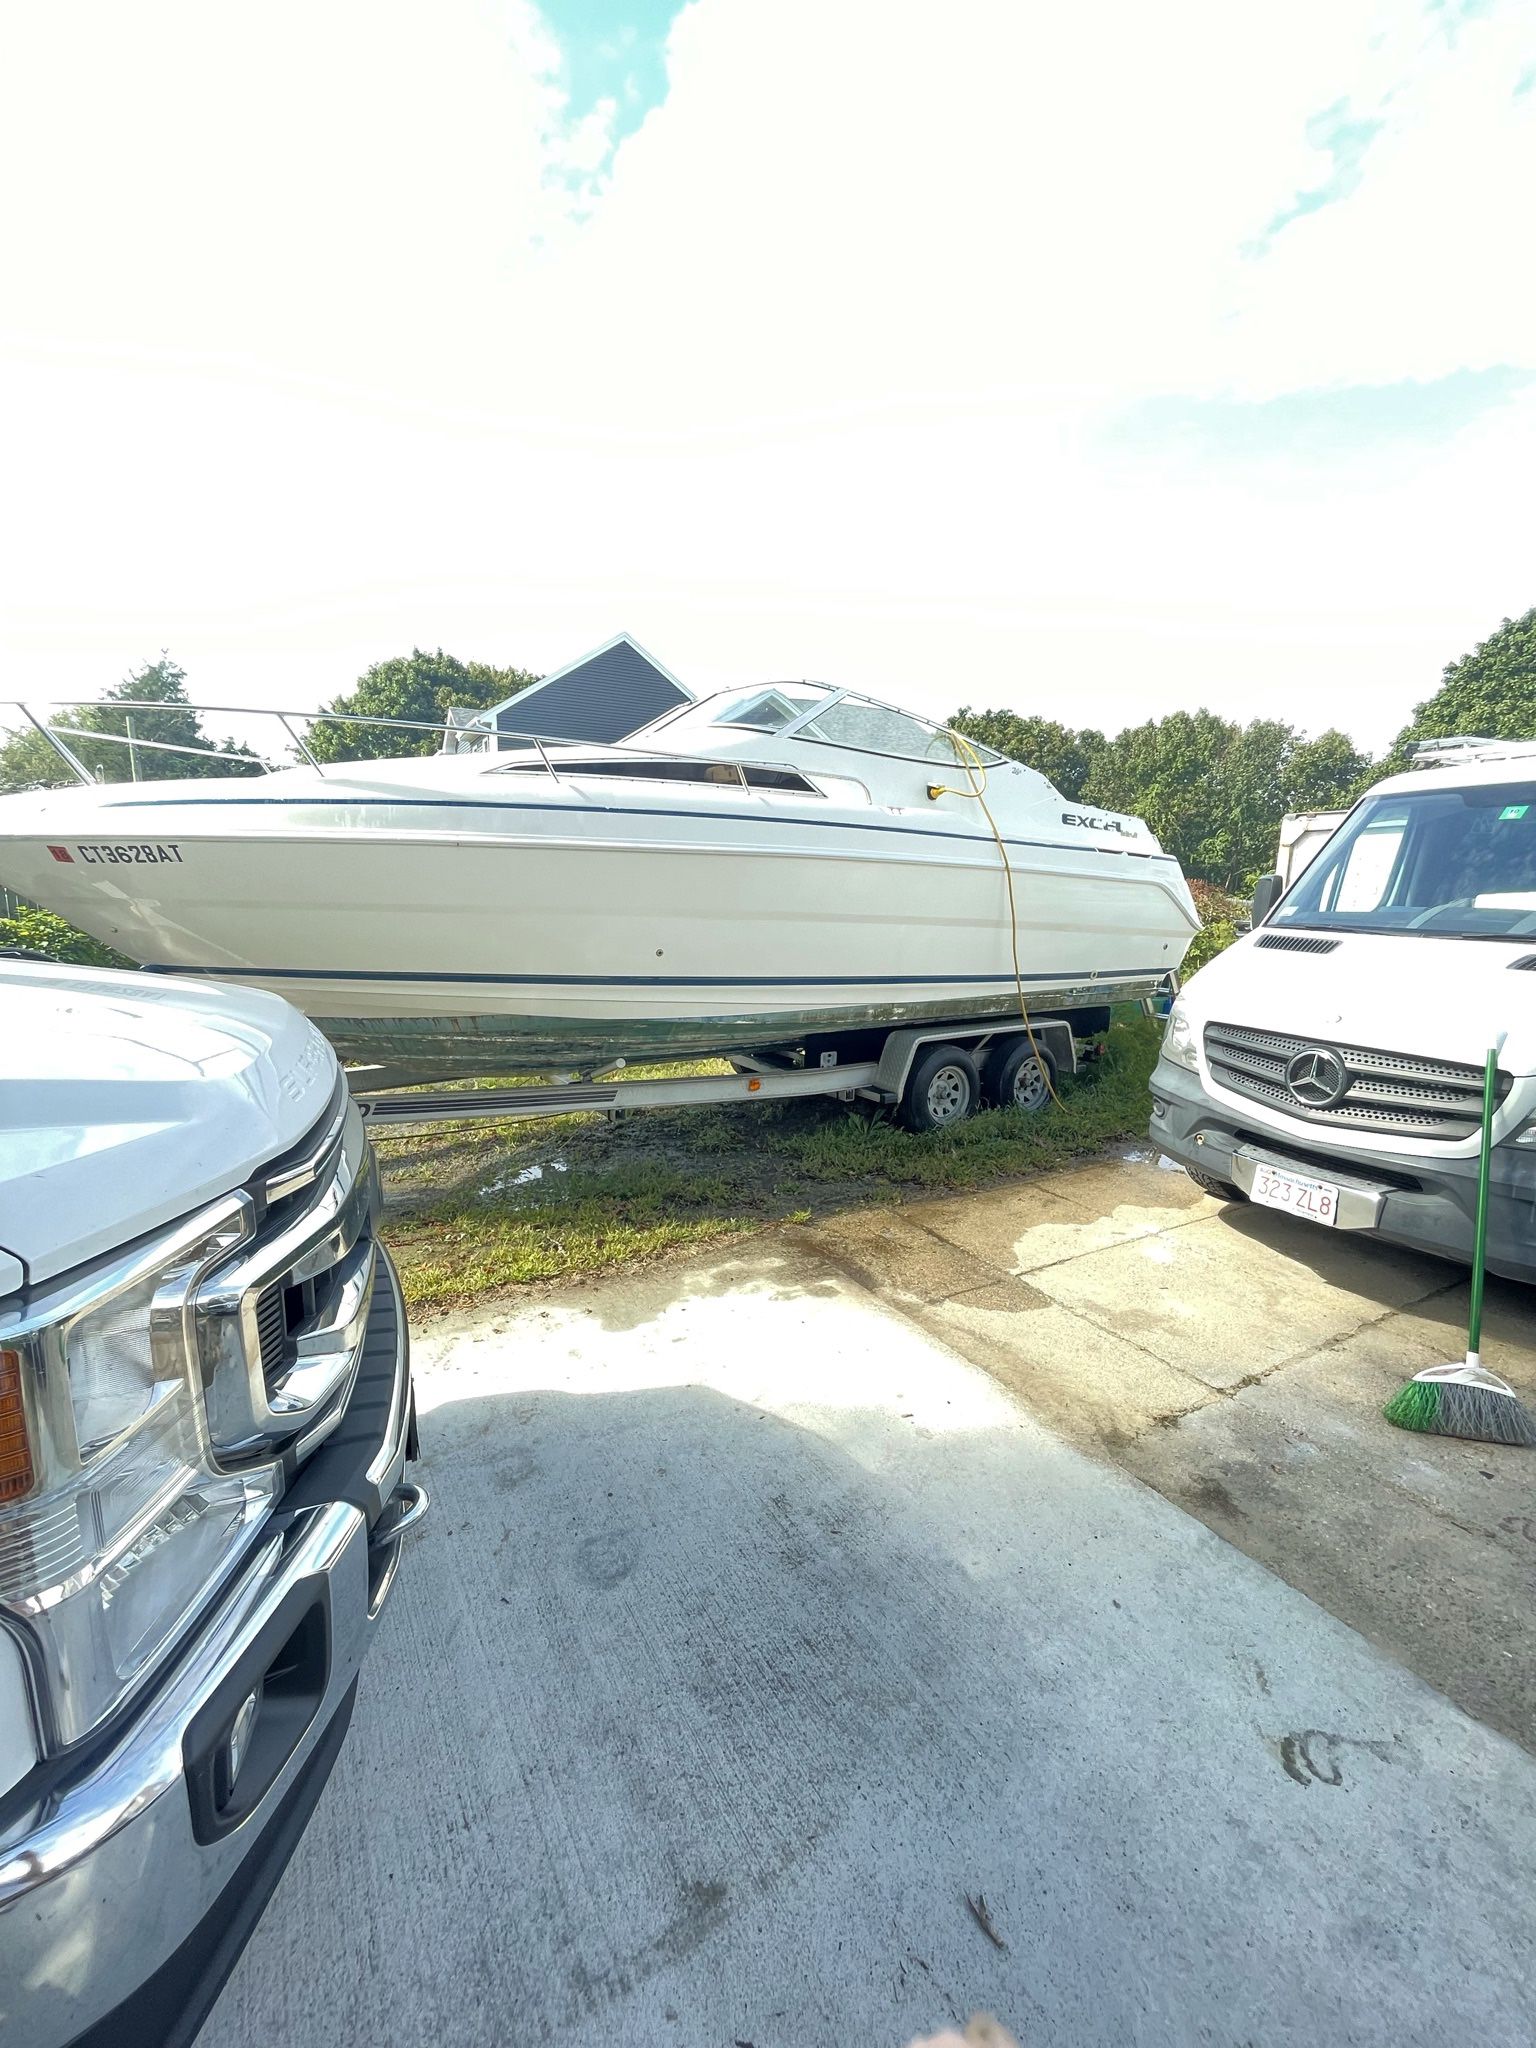 26ft. Wellcraft Excel Boat With Trailer 